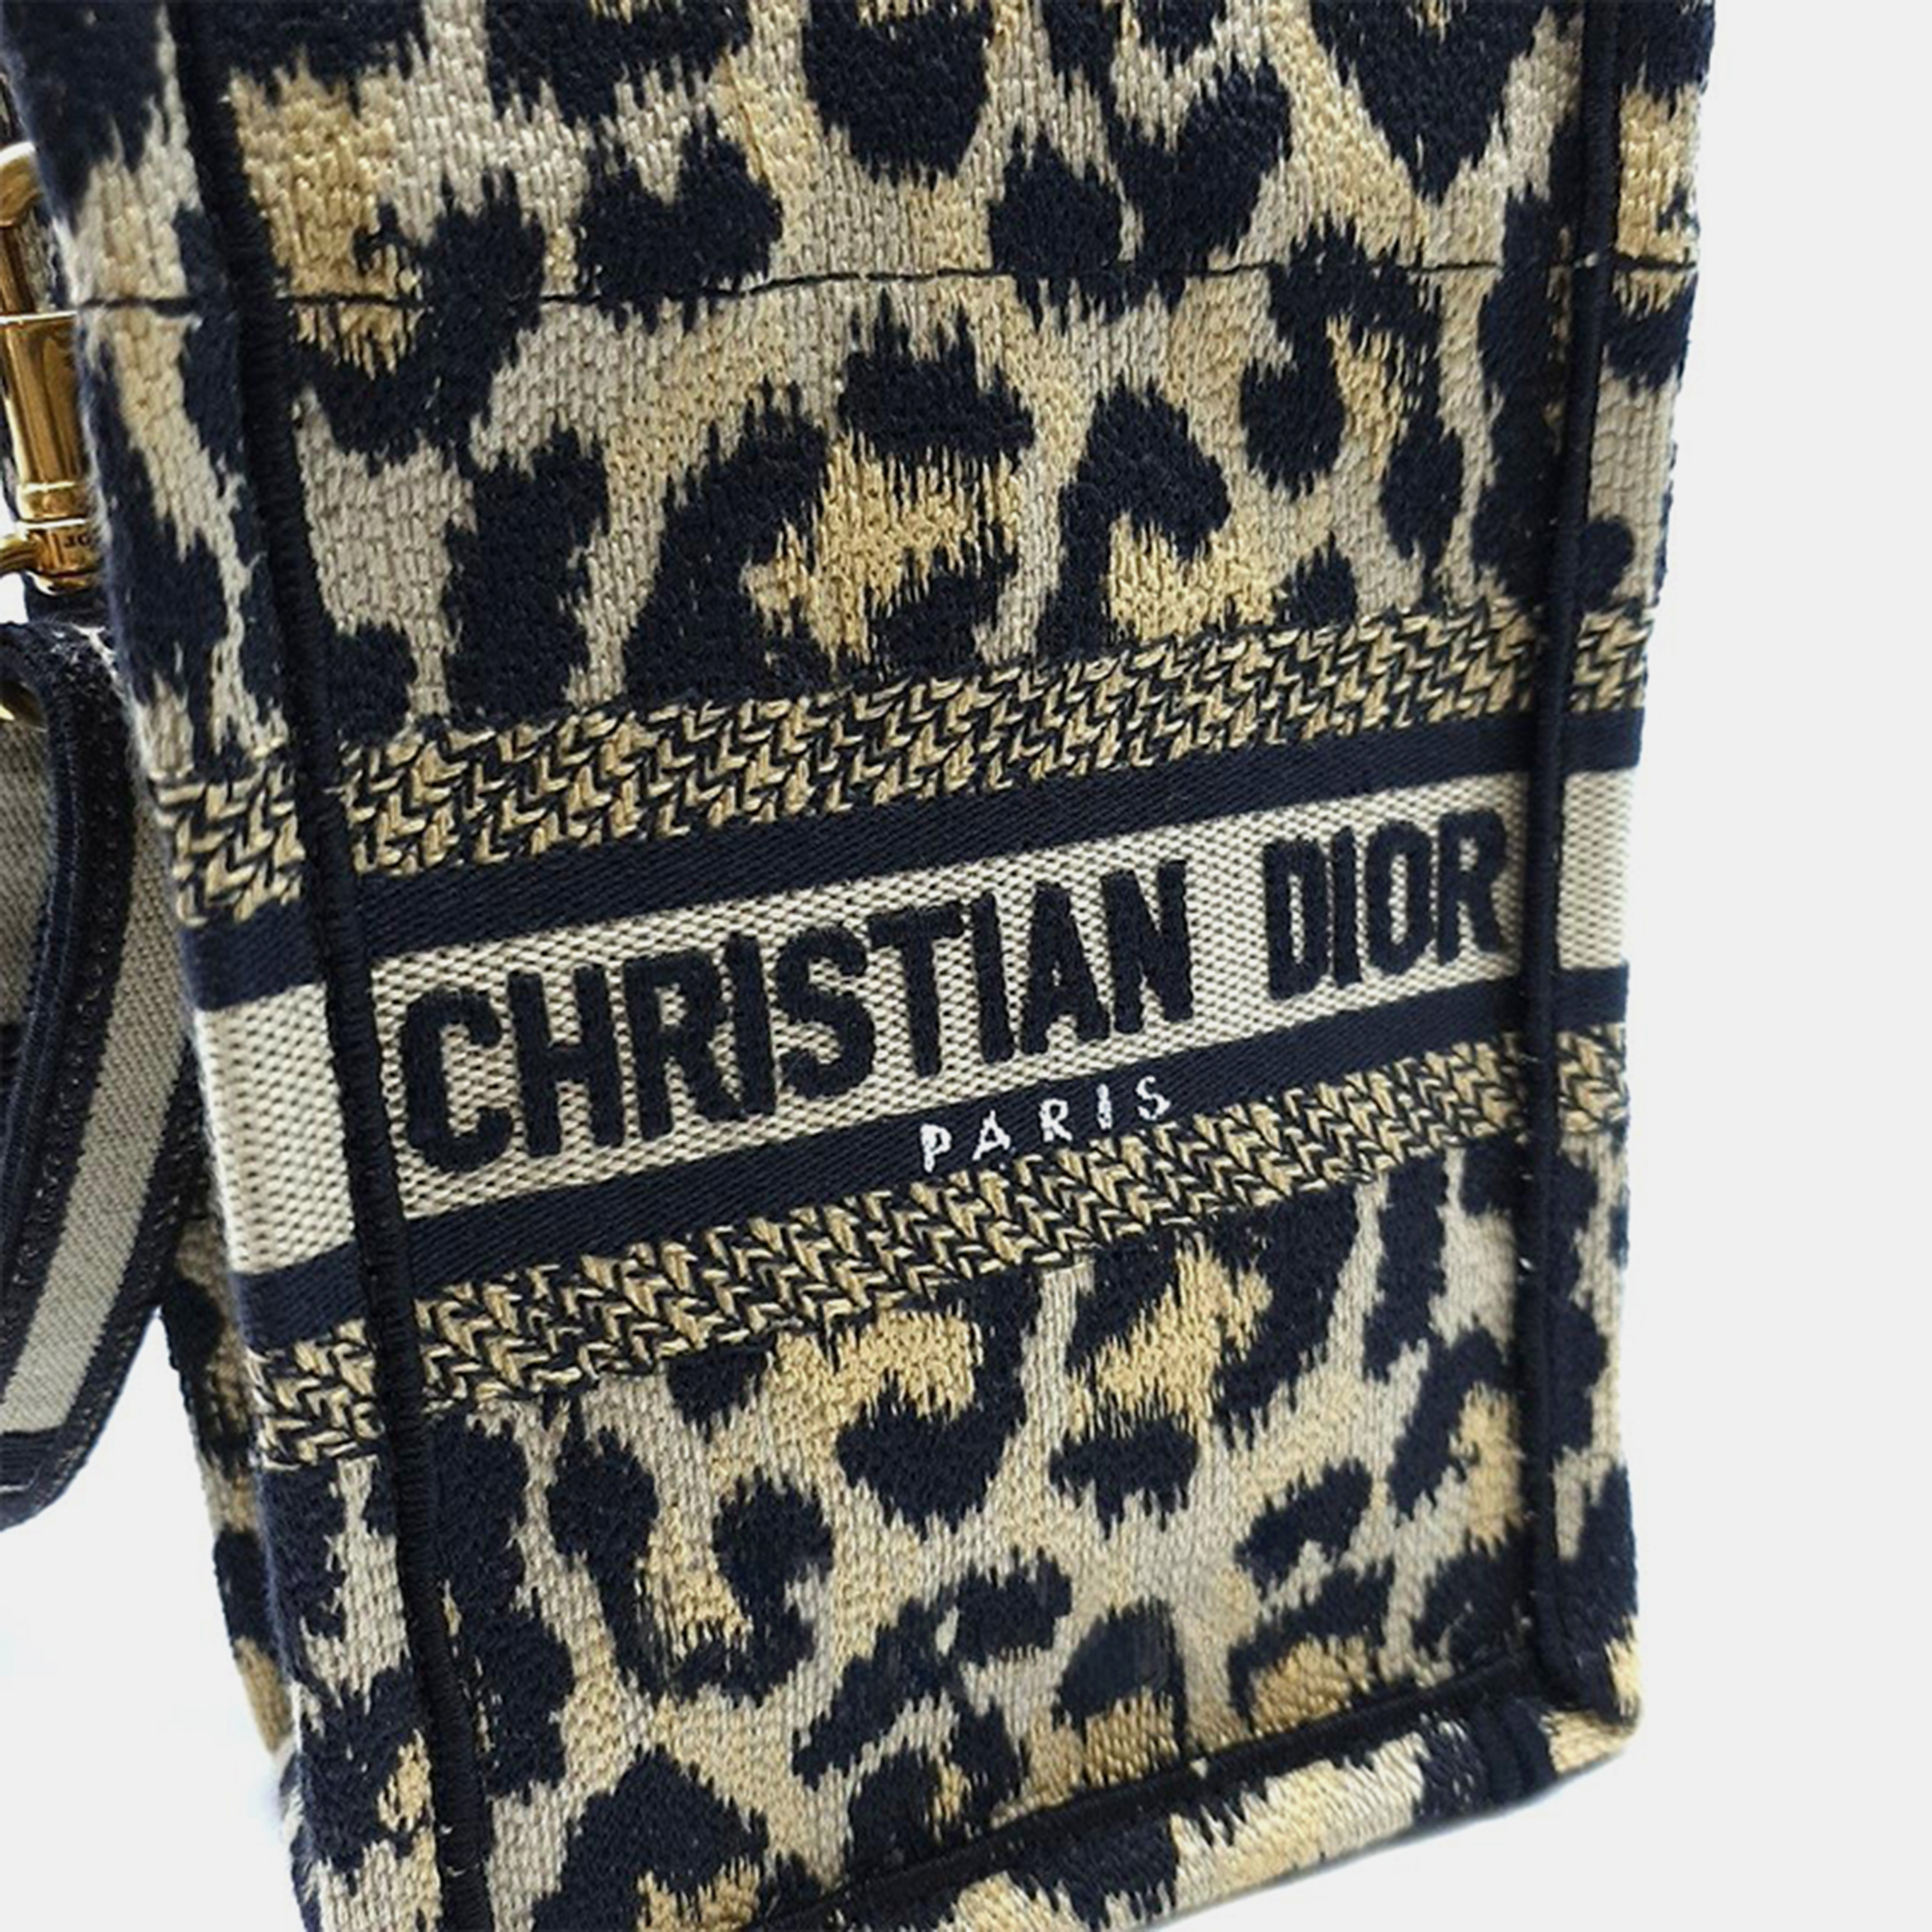 Christian Dior Book Tote Cell Phone Cross Bag